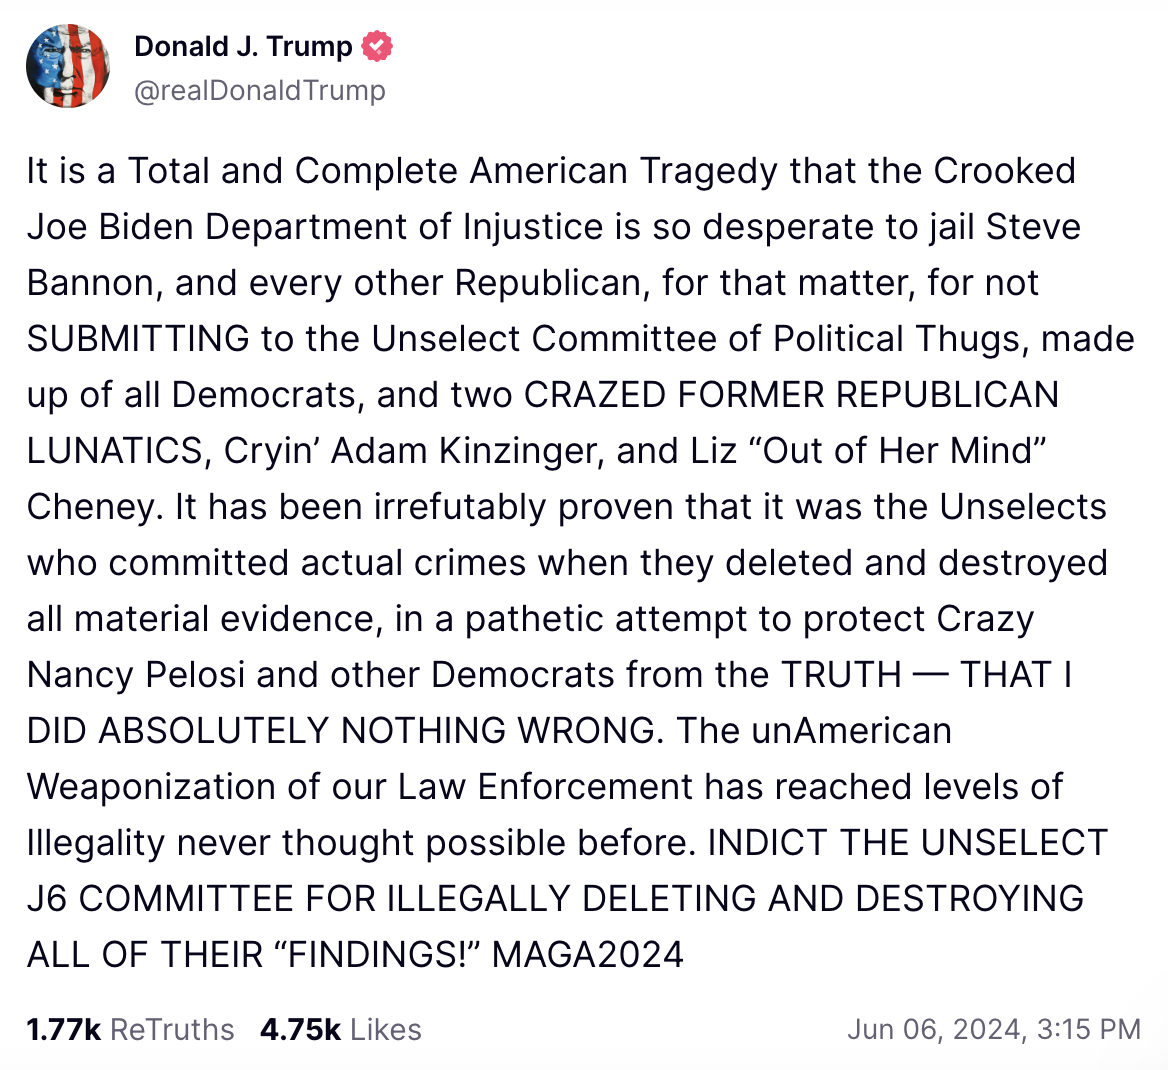 Trump Social Media Post: t is a Total and Complete American Tragedy that the Crooked Joe Biden Department of Injustice is so desperate to jail Steve Bannon, and every other Republican, for that matter, for not SUBMITTING to the Unselect Committee of Political Thugs, made up of all Democrats, and two CRAZED FORMER REPUBLICAN LUNATICS, Cryin’ Adam Kinzinger, and Liz “Out of Her Mind” Cheney. It has been irrefutably proven that it was the Unselects who committed actual crimes when they deleted and destroyed all material evidence, in a pathetic attempt to protect Crazy Nancy Pelosi and other Democrats from the TRUTH — THAT I DID ABSOLUTELY NOTHING WRONG. The unAmerican Weaponization of our Law Enforcement has reached levels of Illegality never thought possible before. INDICT THE UNSELECT J6 COMMITTEE FOR ILLEGALLY DELETING AND DESTROYING ALL OF THEIR “FINDINGS!” MAGA2024